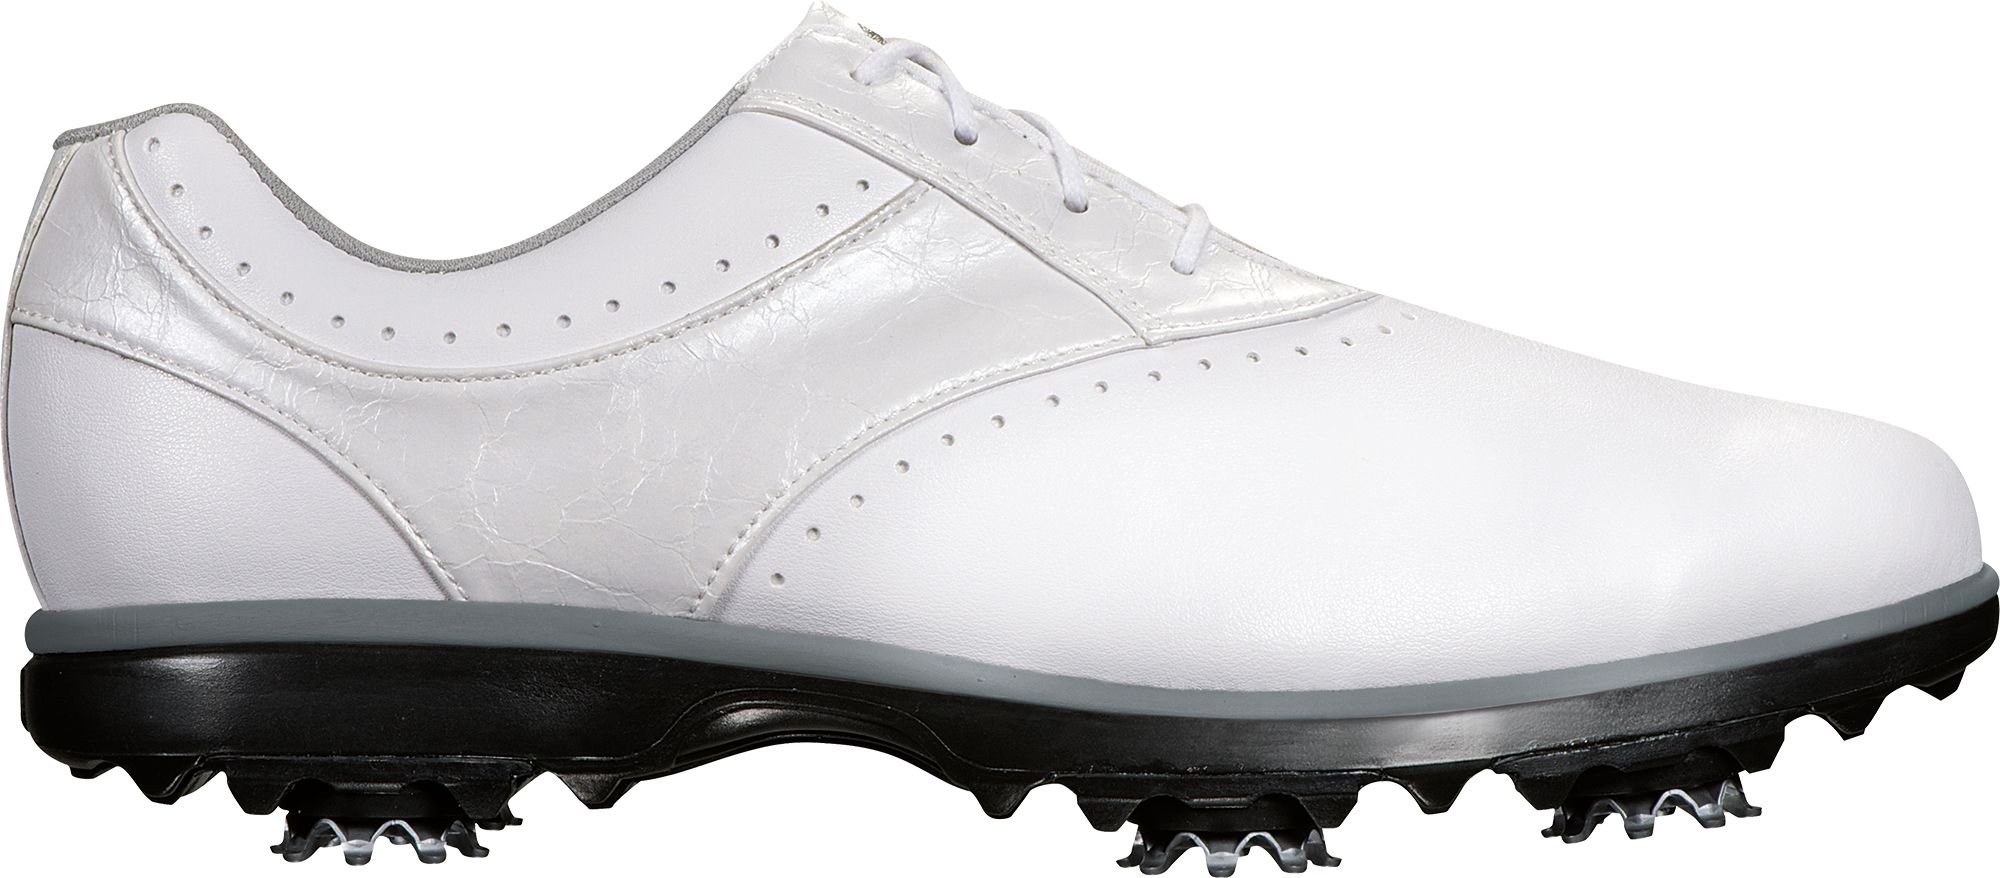 Women's Golf Shoes | Best Price Guarantee at DICK'S